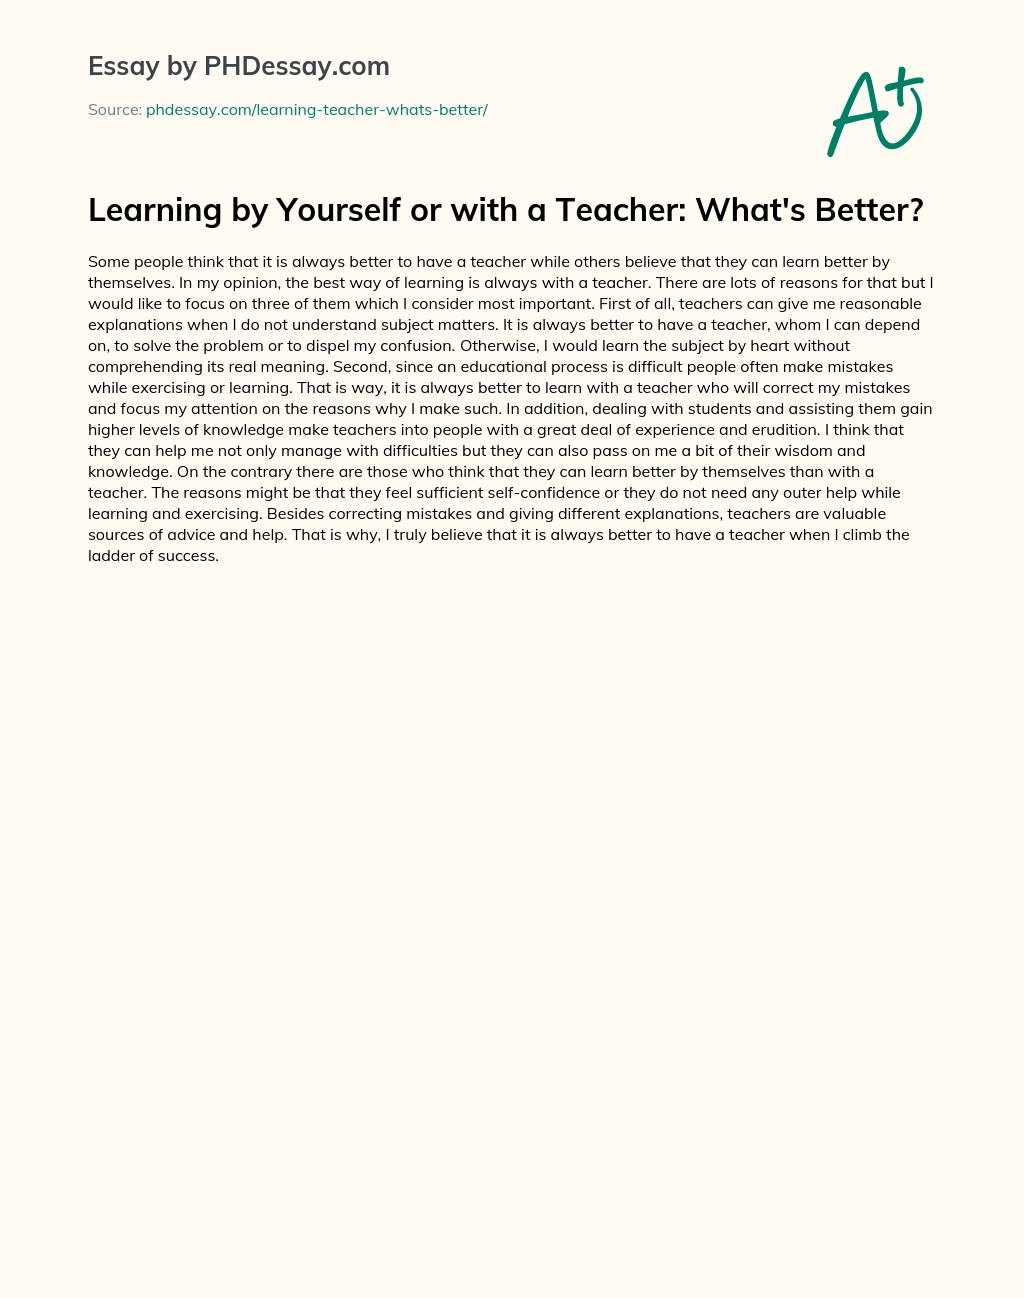 Learning by Yourself or with a Teacher: What’s Better? essay